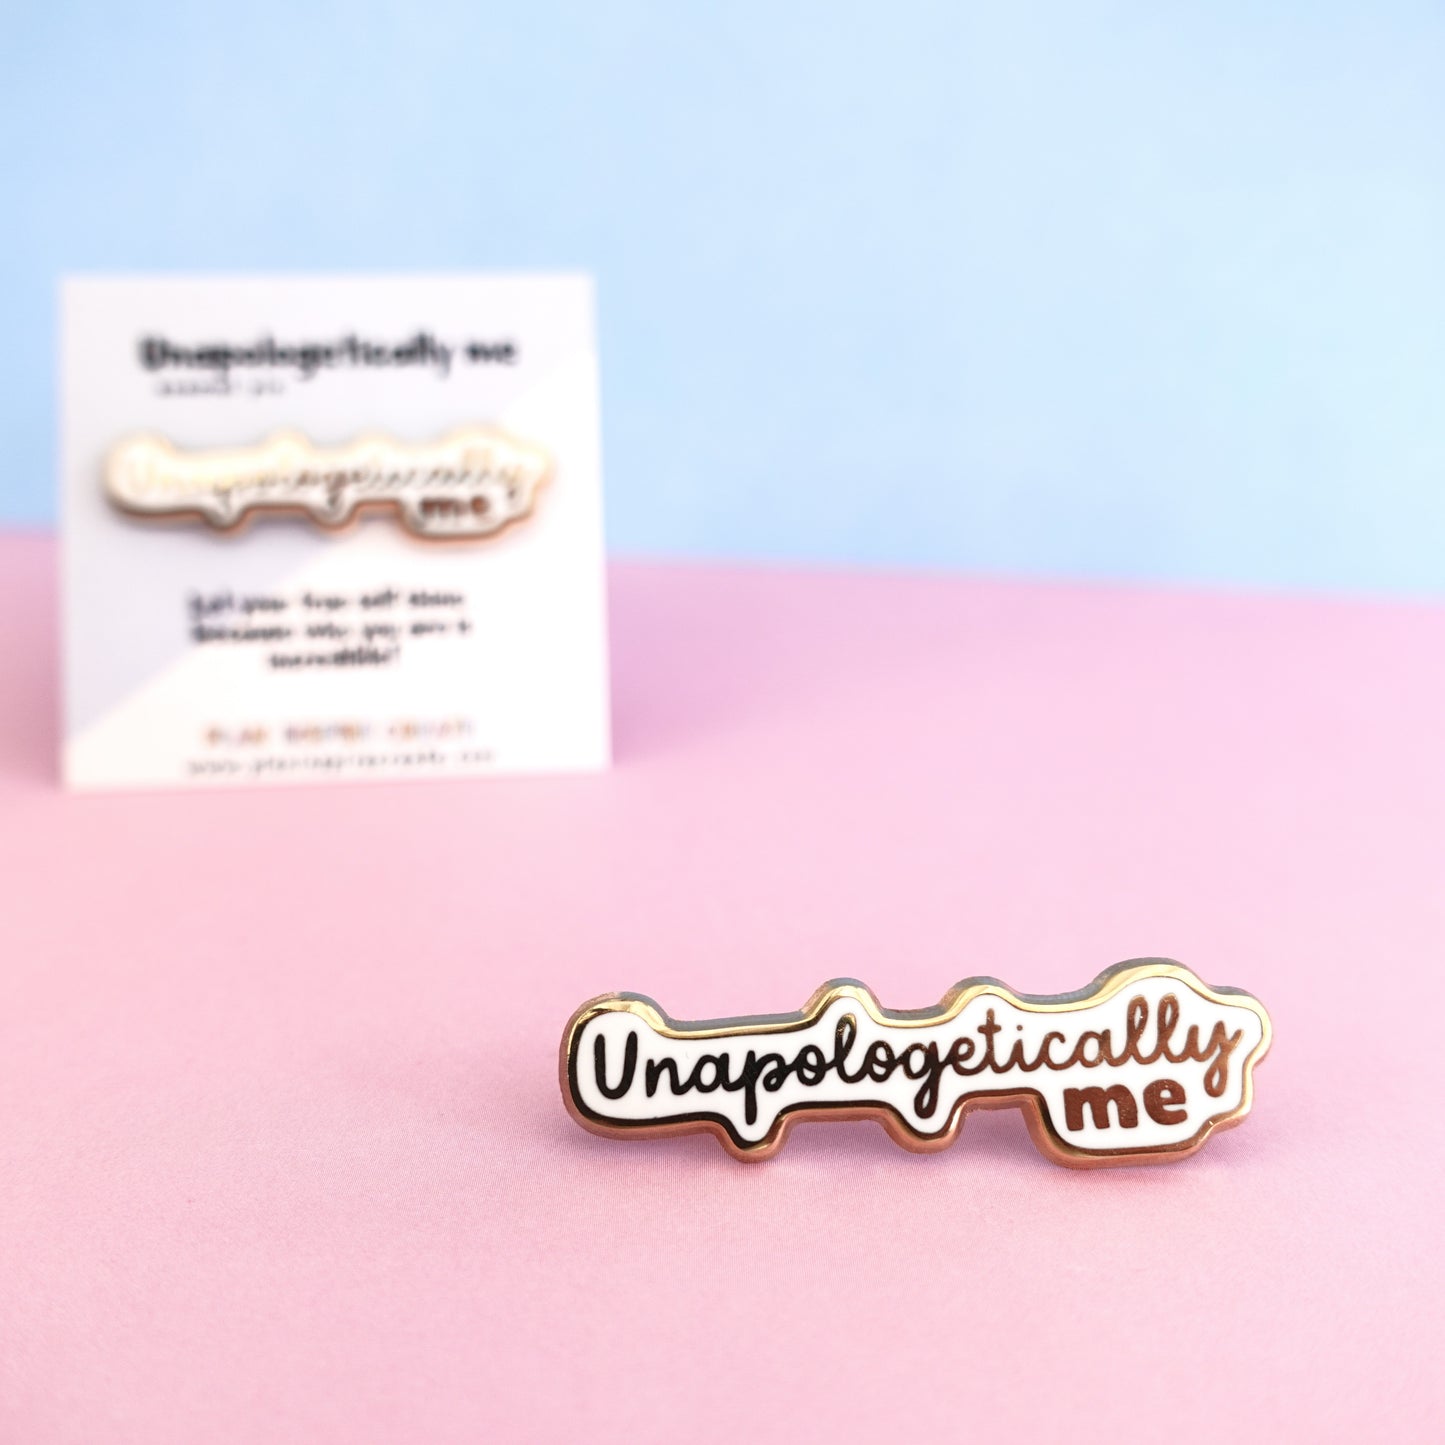 Unapologetically Me Pin